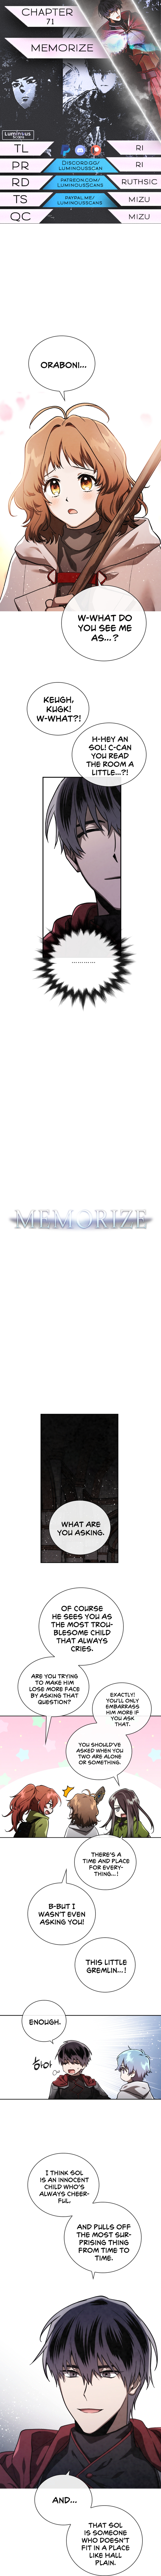 Memorize - Chapter 12579 - Image 1